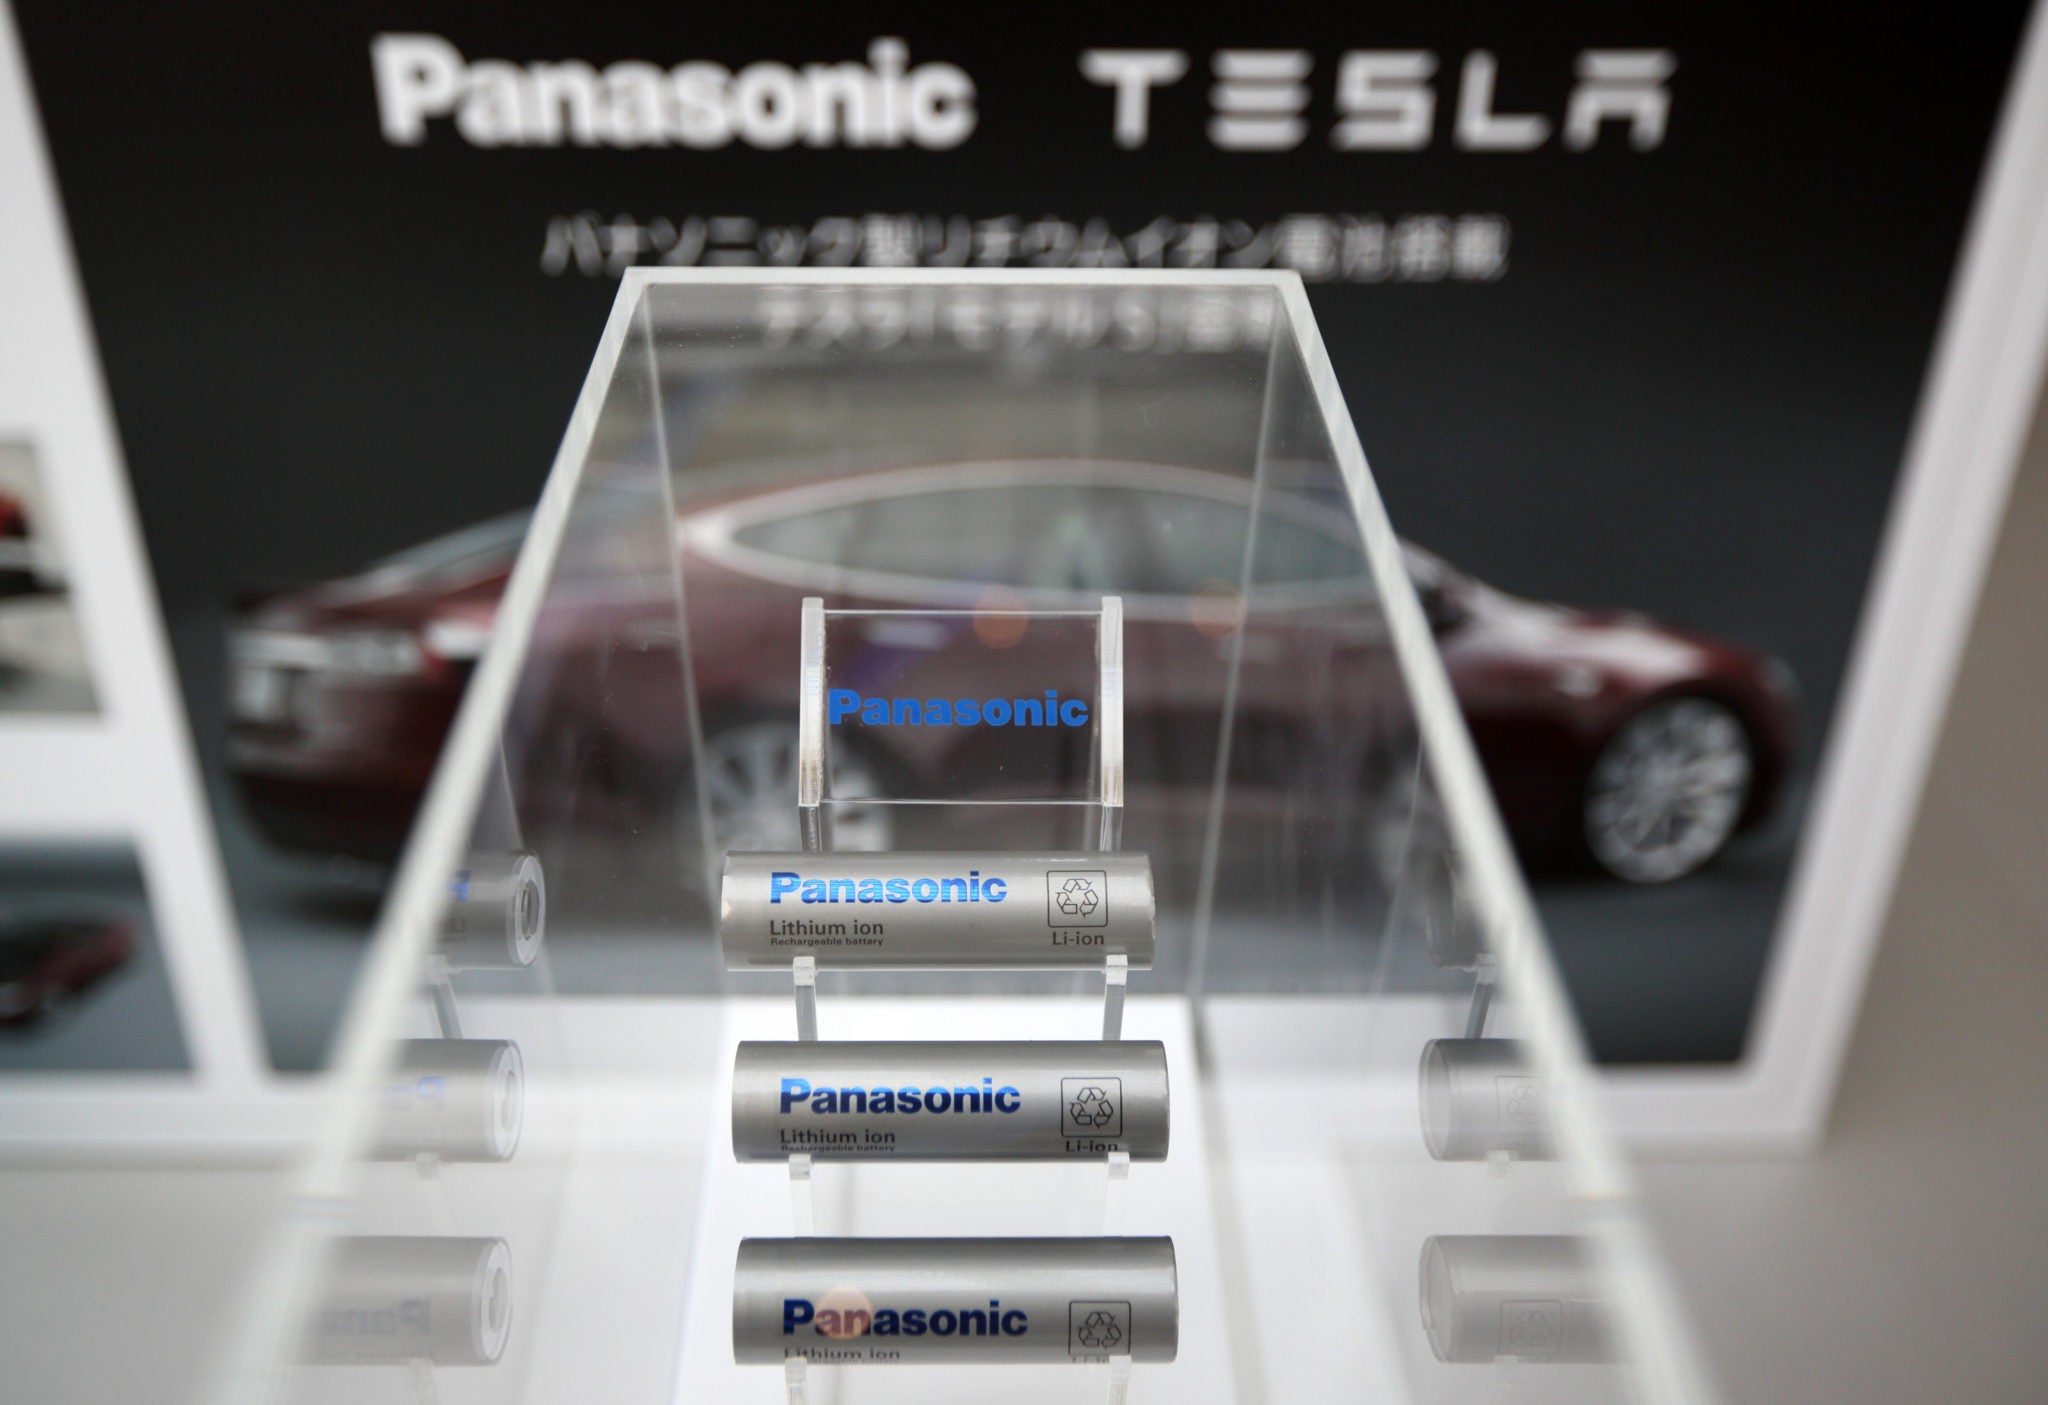 Tesla Battery Partner Panasonic Plans To Boost 2170 Cells' Energy Density By 20%